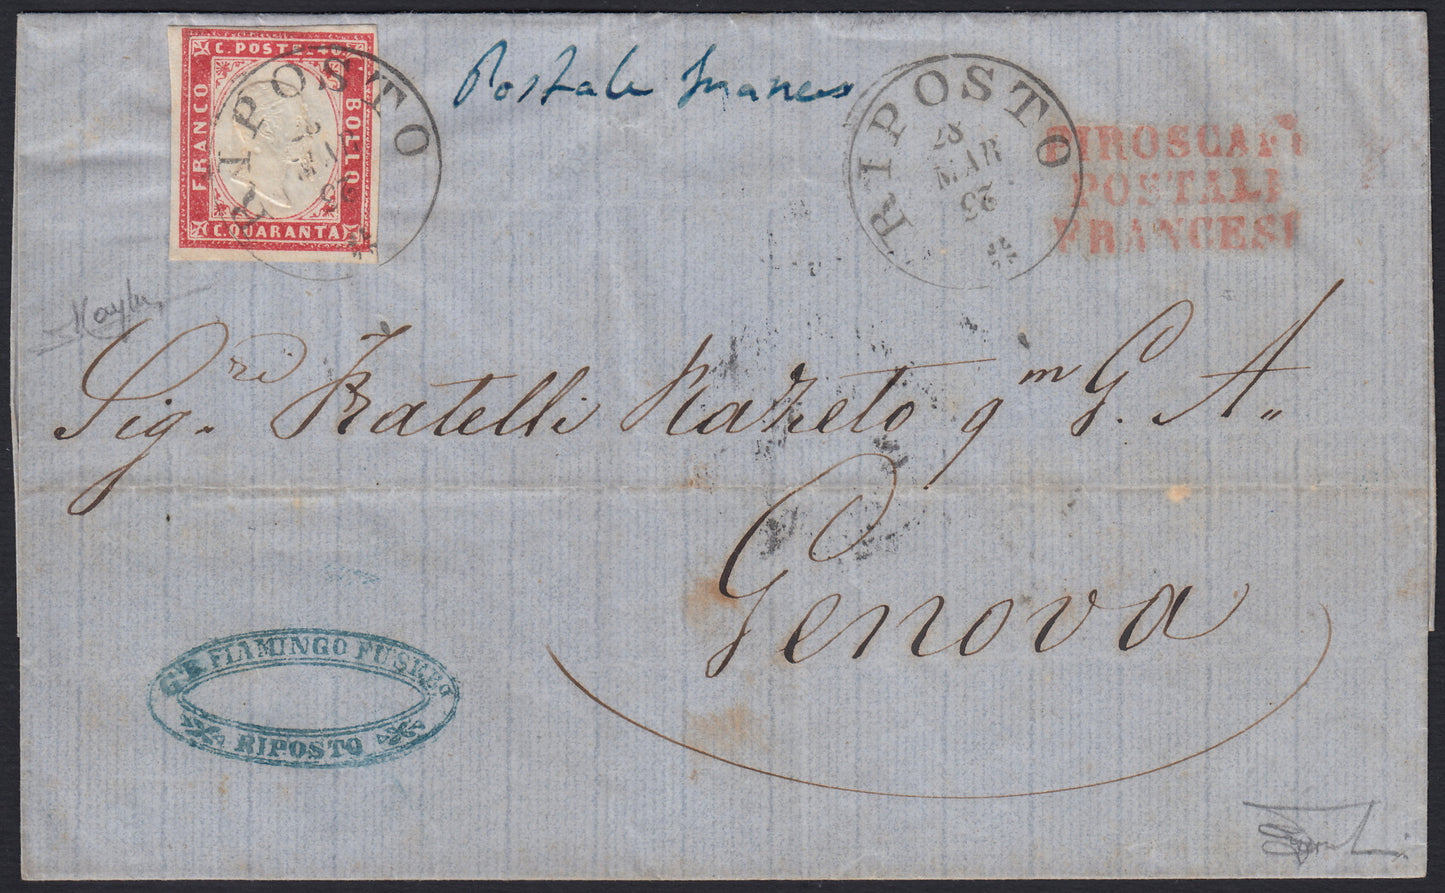 SardSP302 - 1863 - IV issue c. 40 carmine pink edition 1862 on letter from Riposto to Genoa 28/3/63 with the French Postal Steamers (16E).